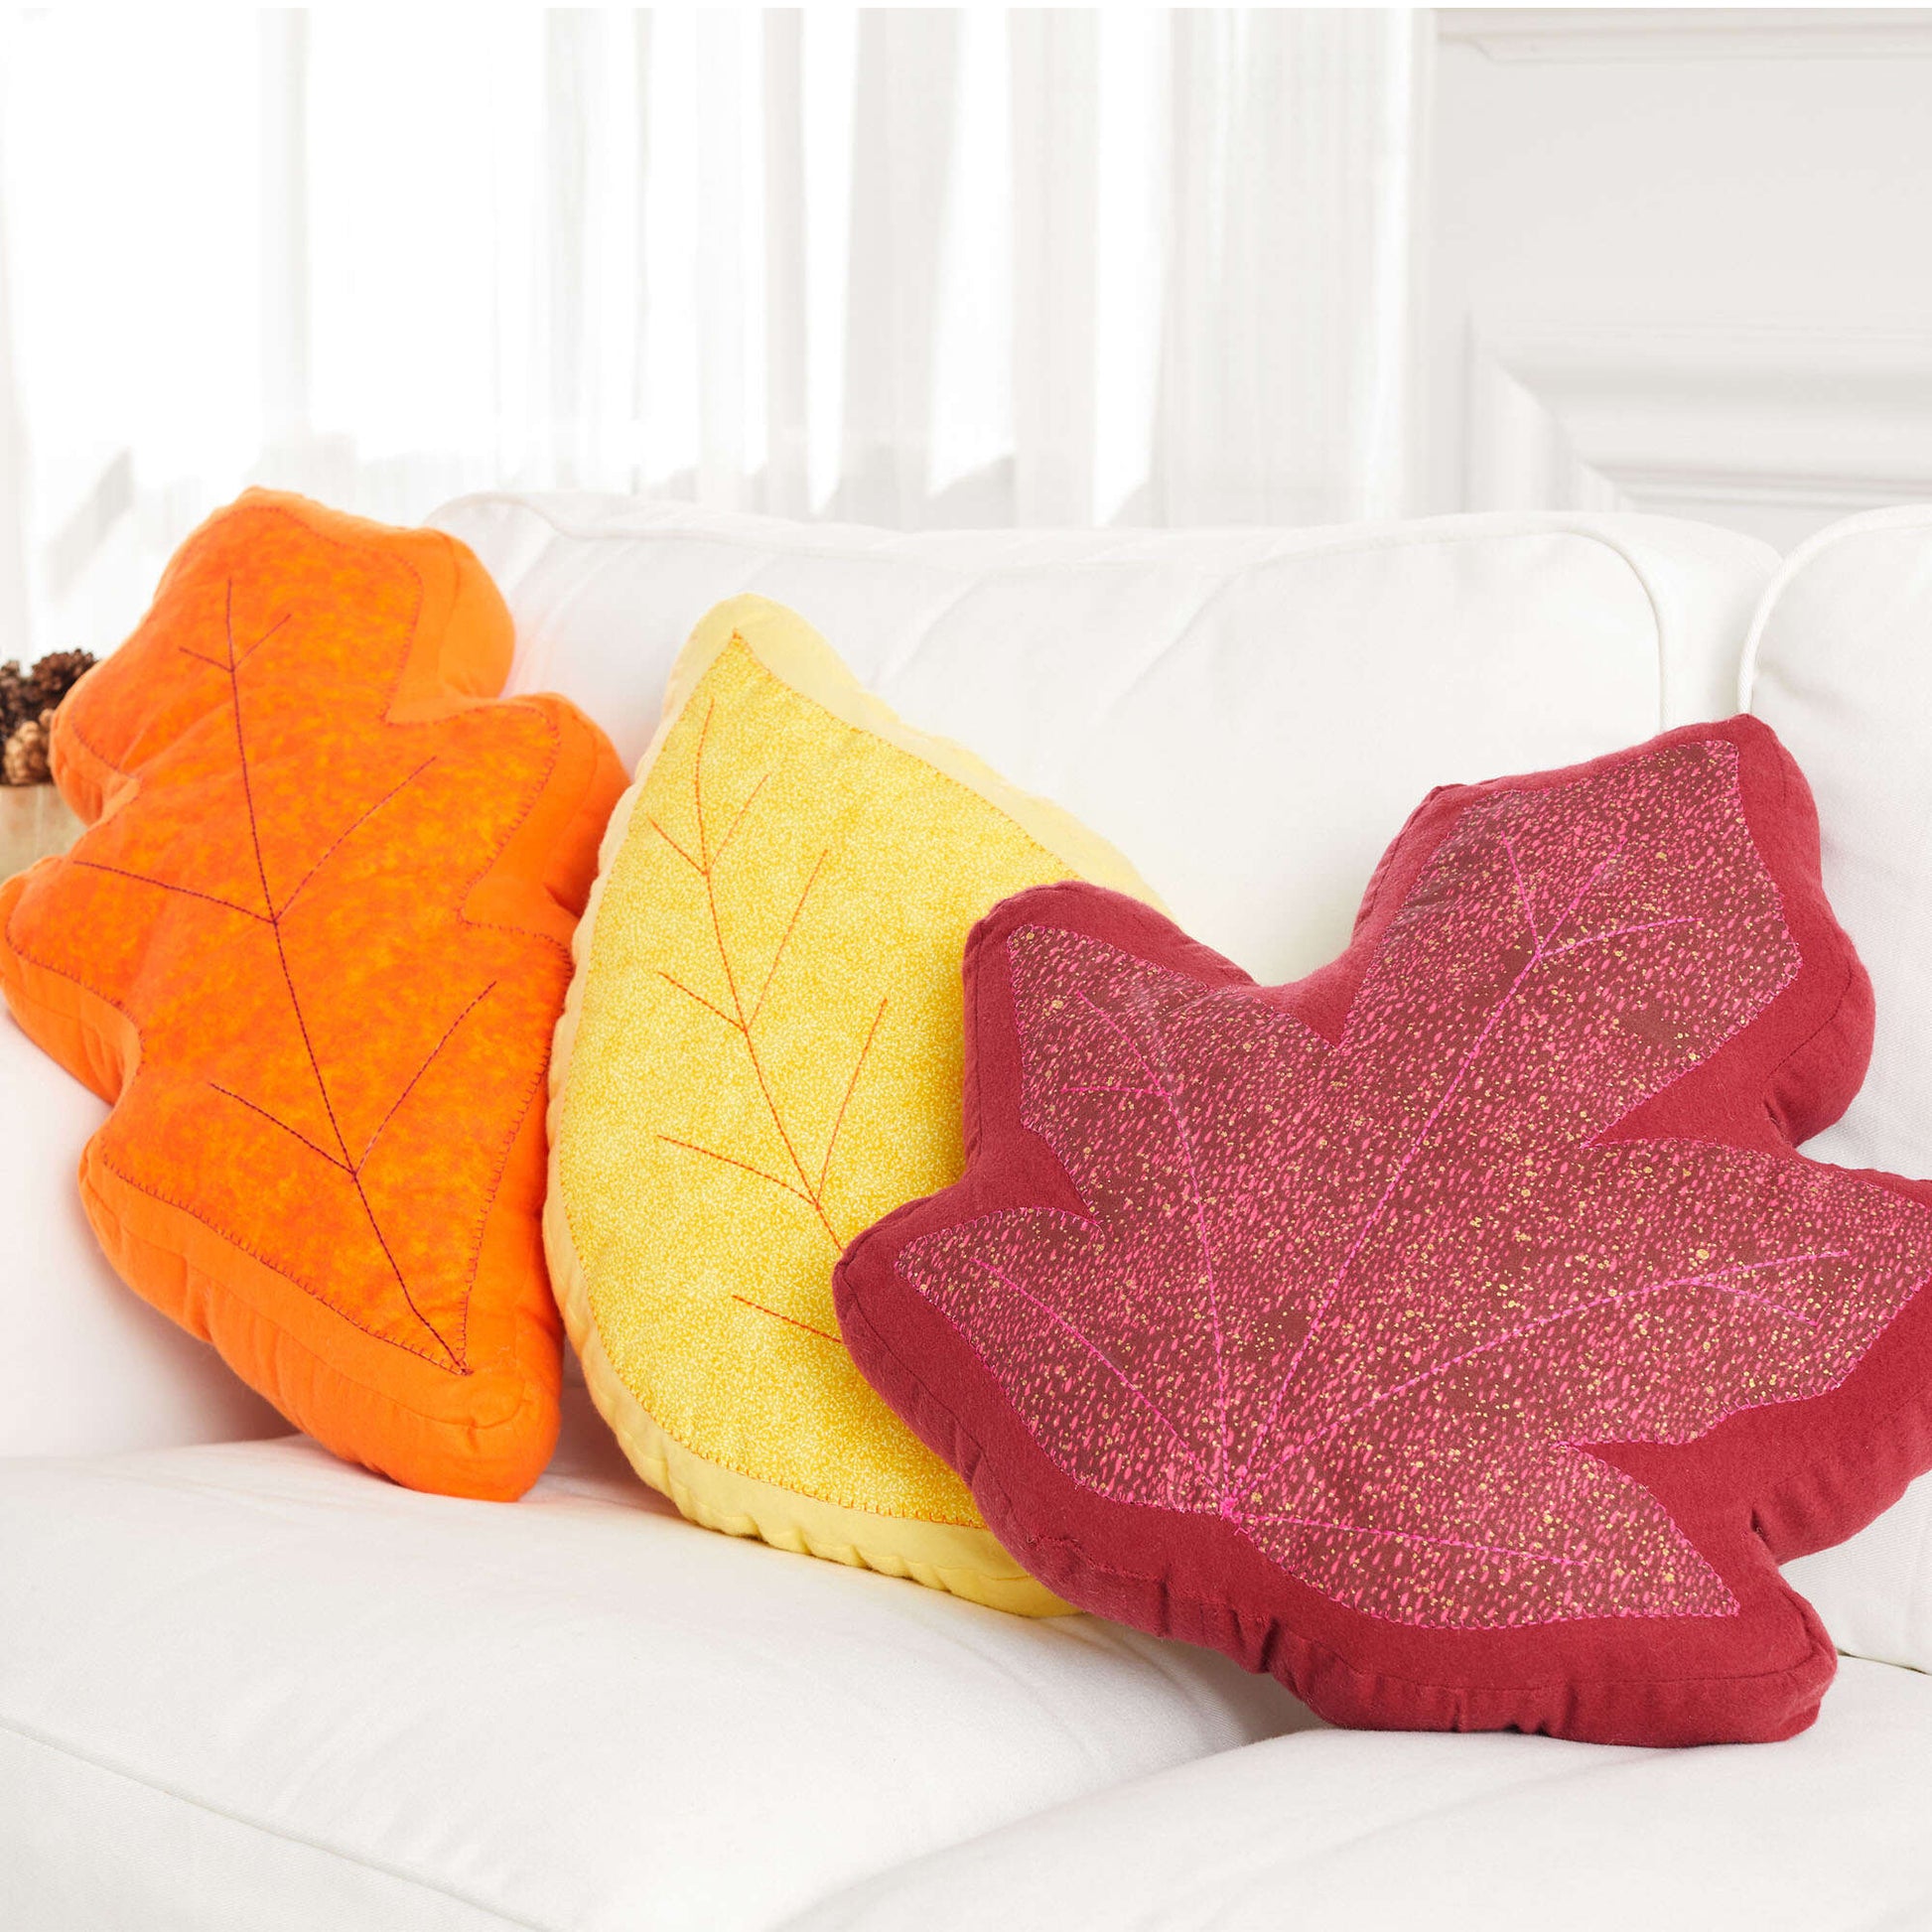 Free Coats Sewing & Clark Autumn Leaves Pillows Pattern